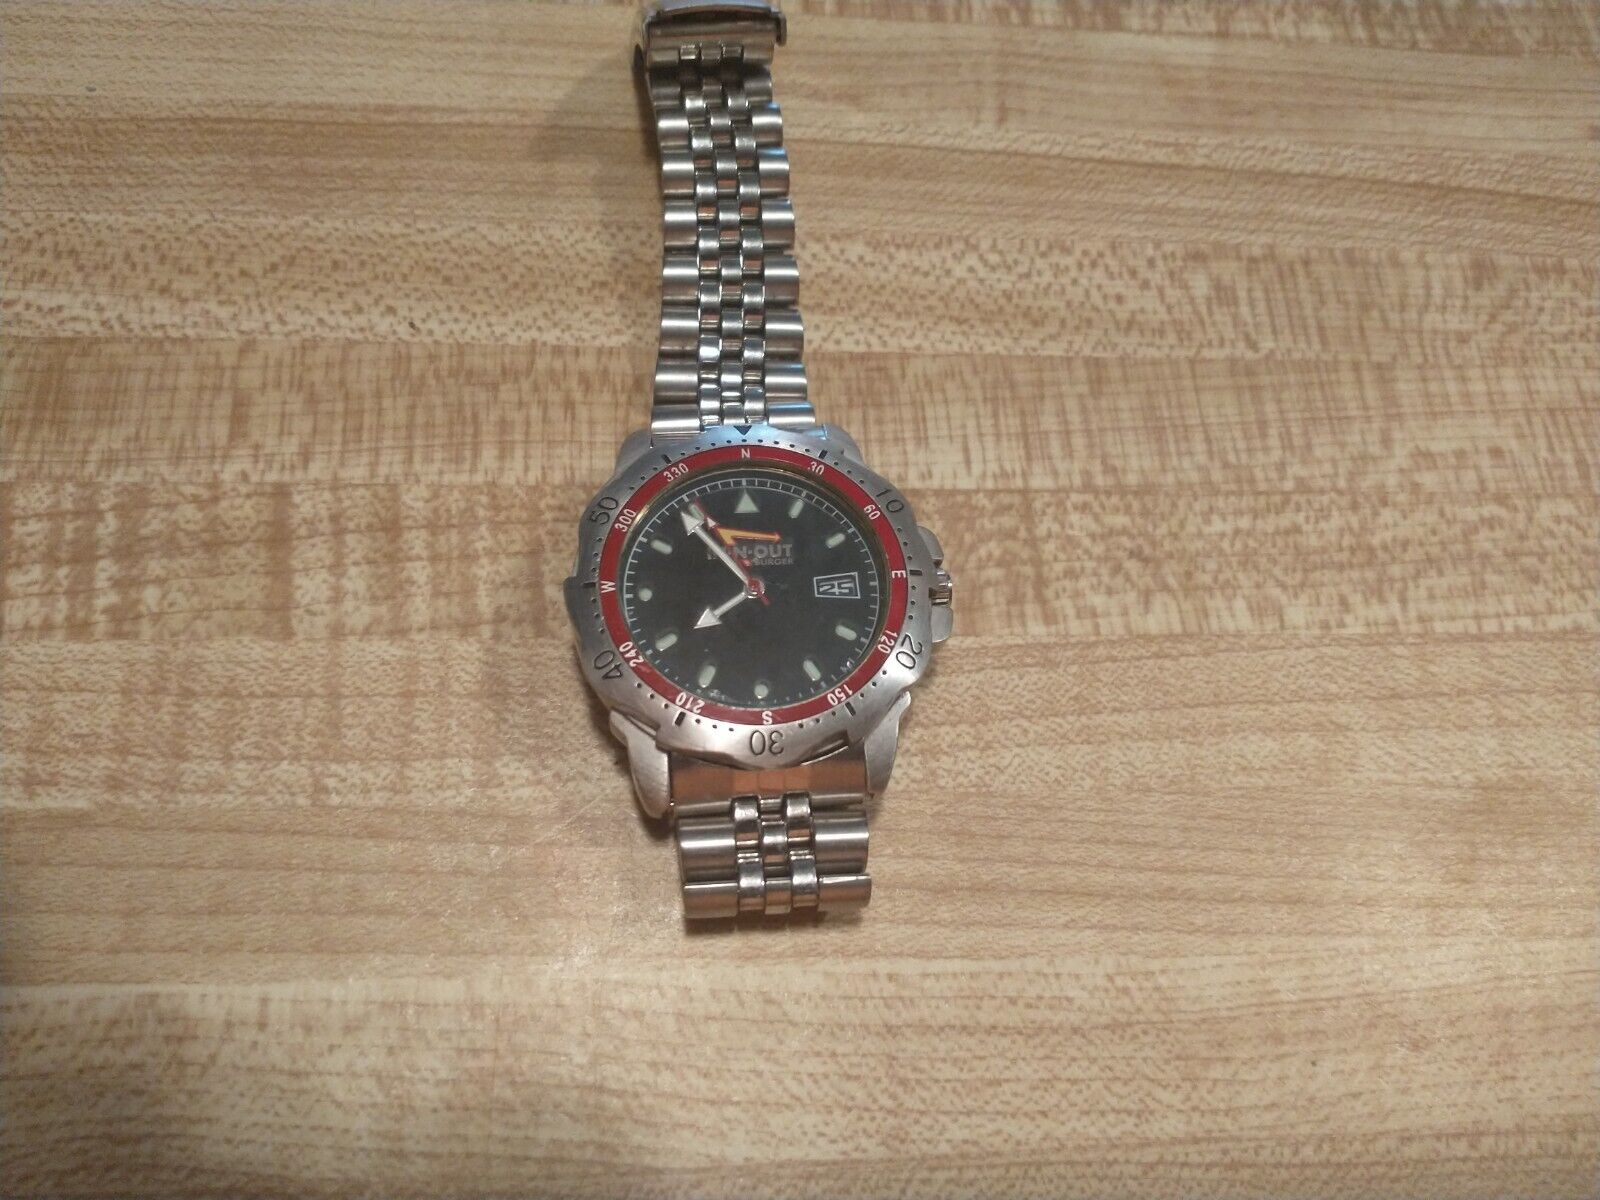 NICE RARE Vintage In N Out Burger Wrist Watch.